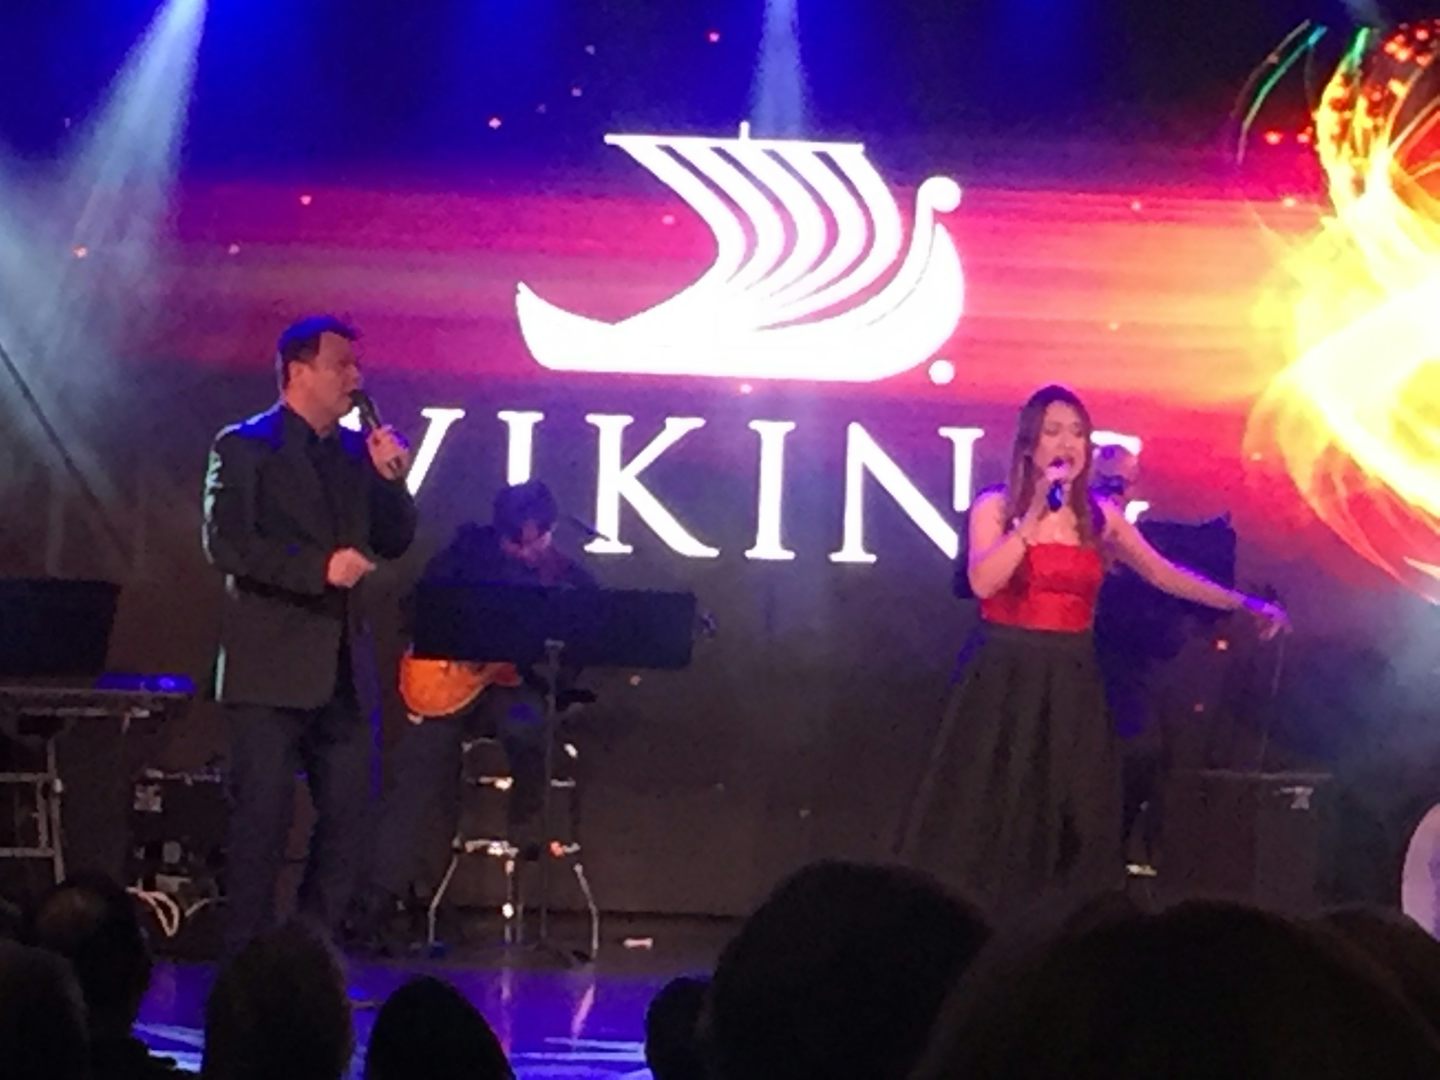 Viking entertainment in the evening